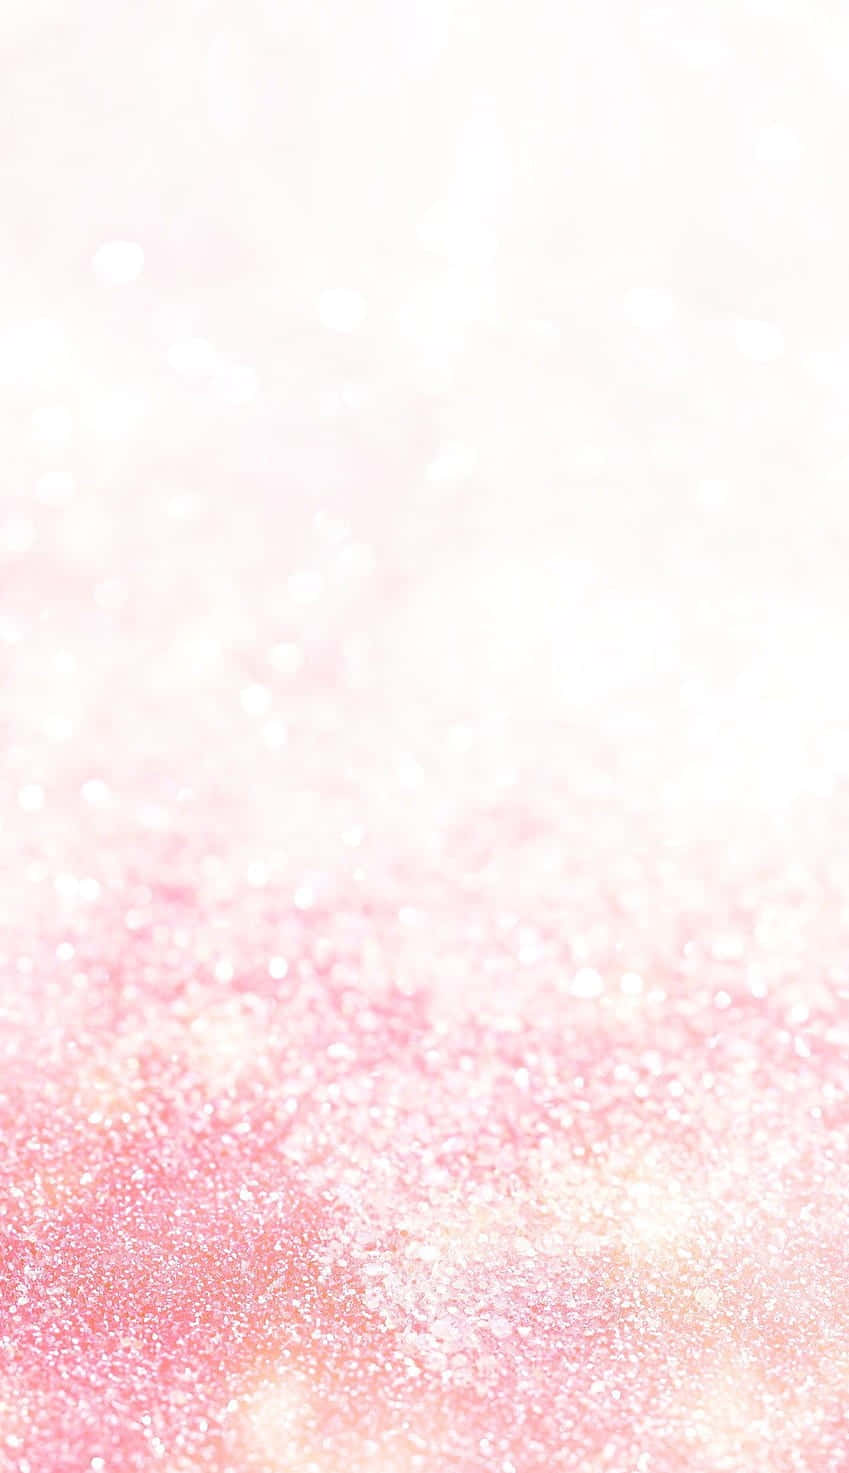 Pink Glitter Background With White Sparkles